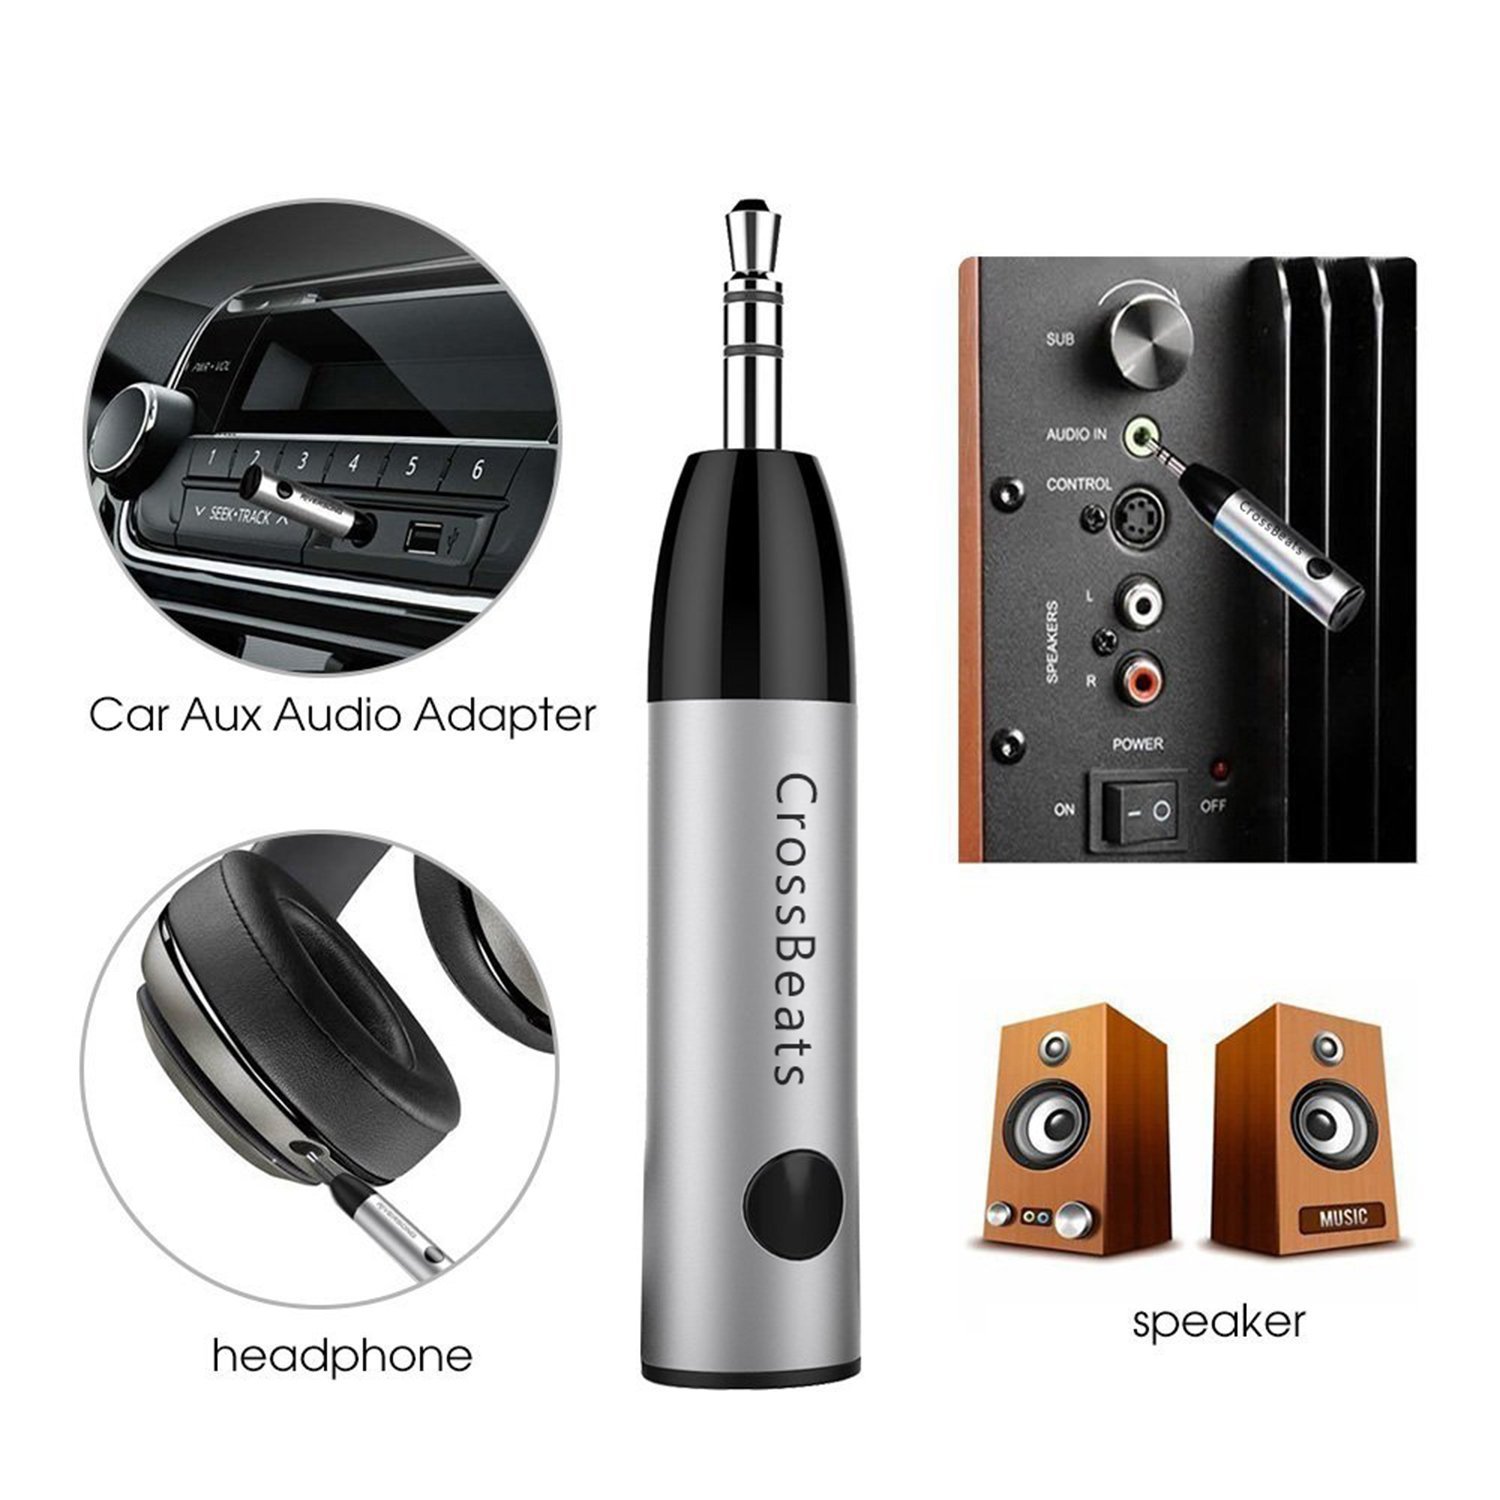 CrossBeats Mini Bluetooth Receiver For Car In India